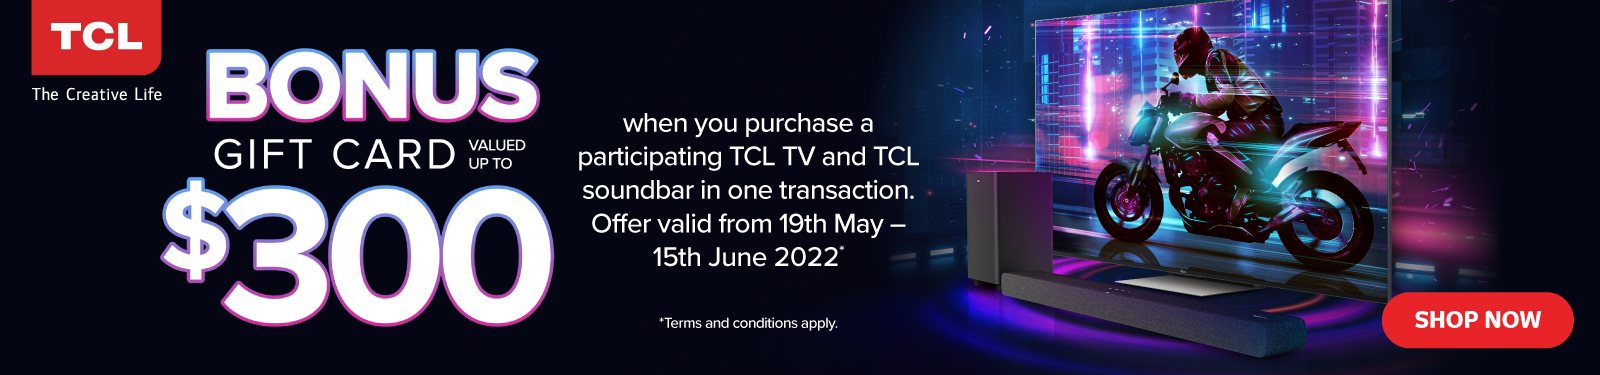 Bonus Gift Card With Selected TCL TV & Soundbar Packages at Retravision